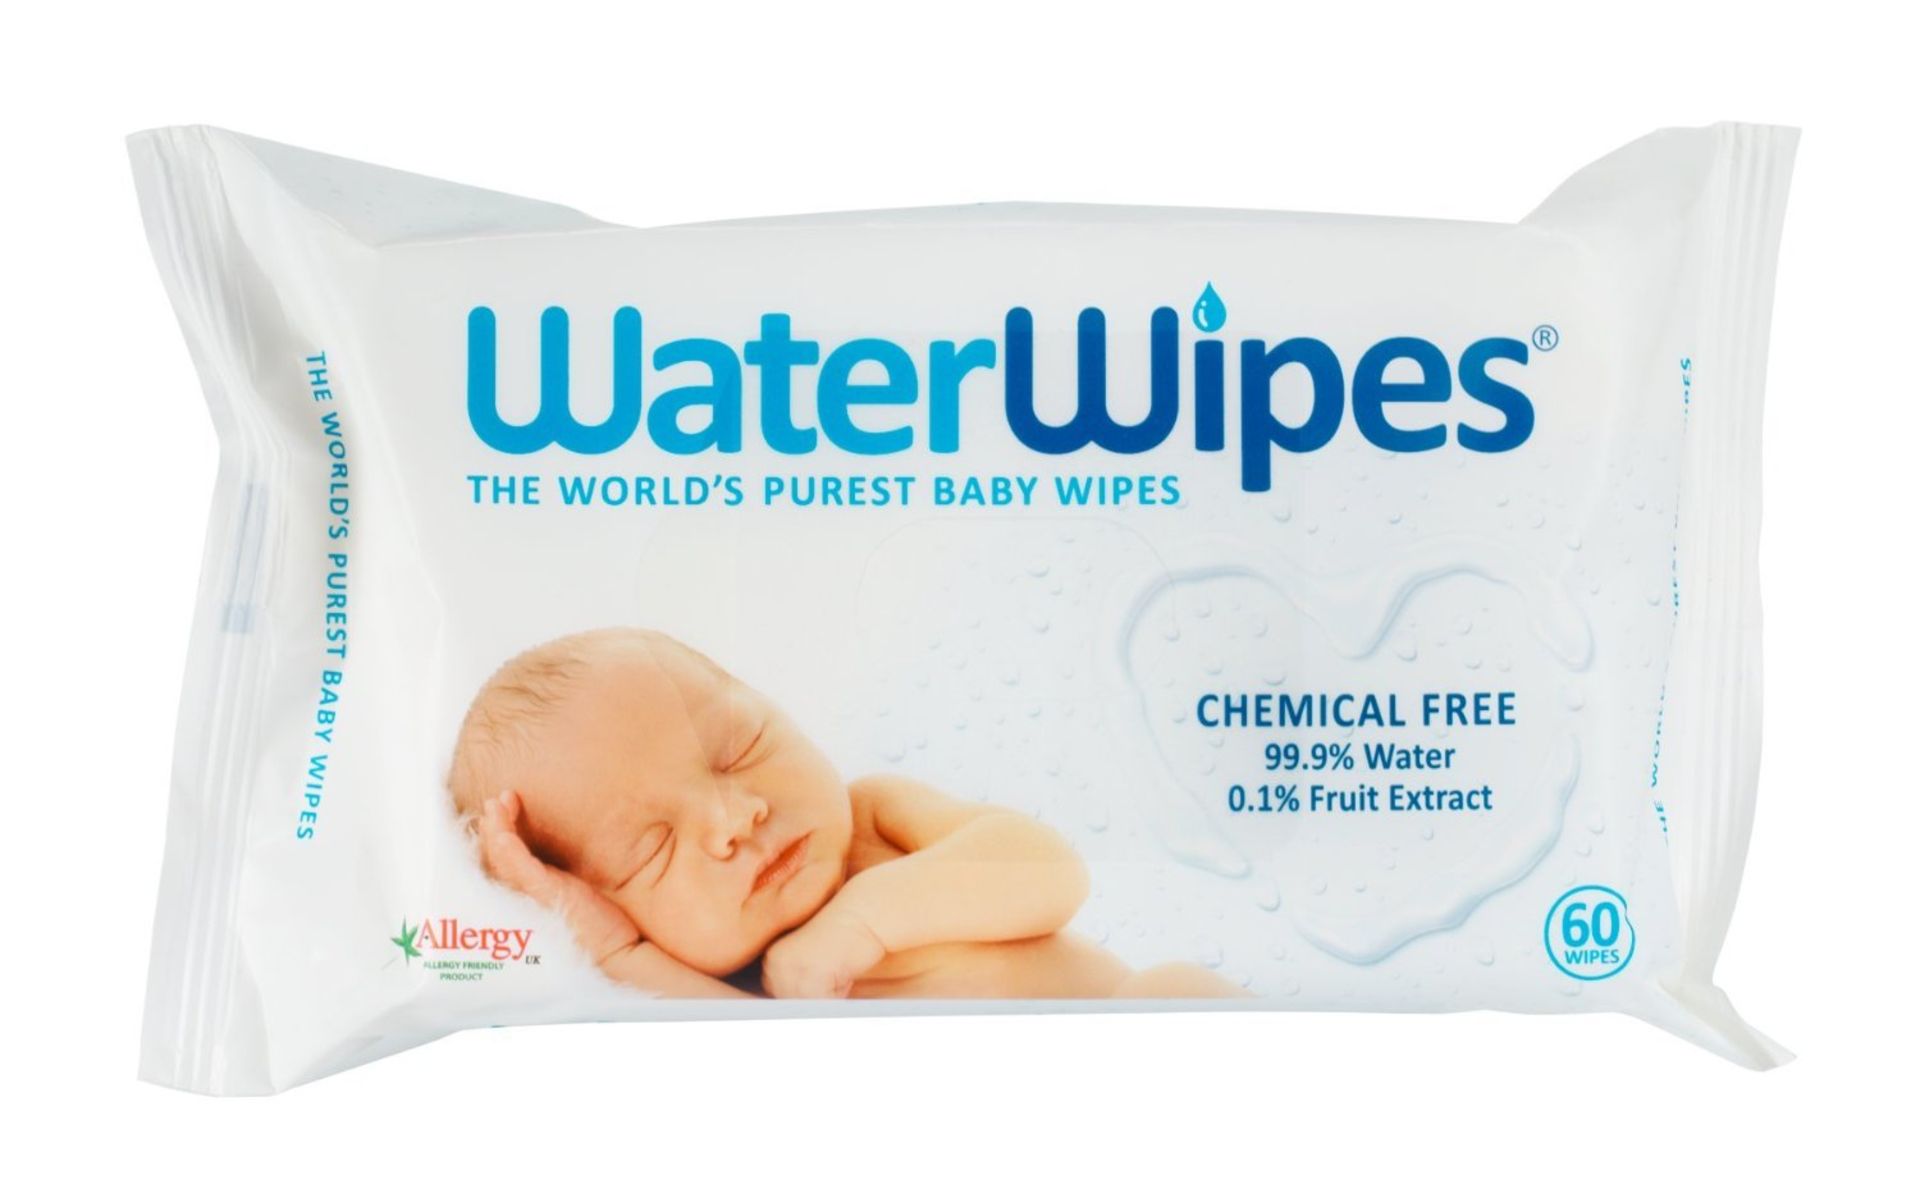 1 Carton Containing Baby Products Various Nappies and Wipes- Total Online Retail Value £ 109+ - Image 5 of 7